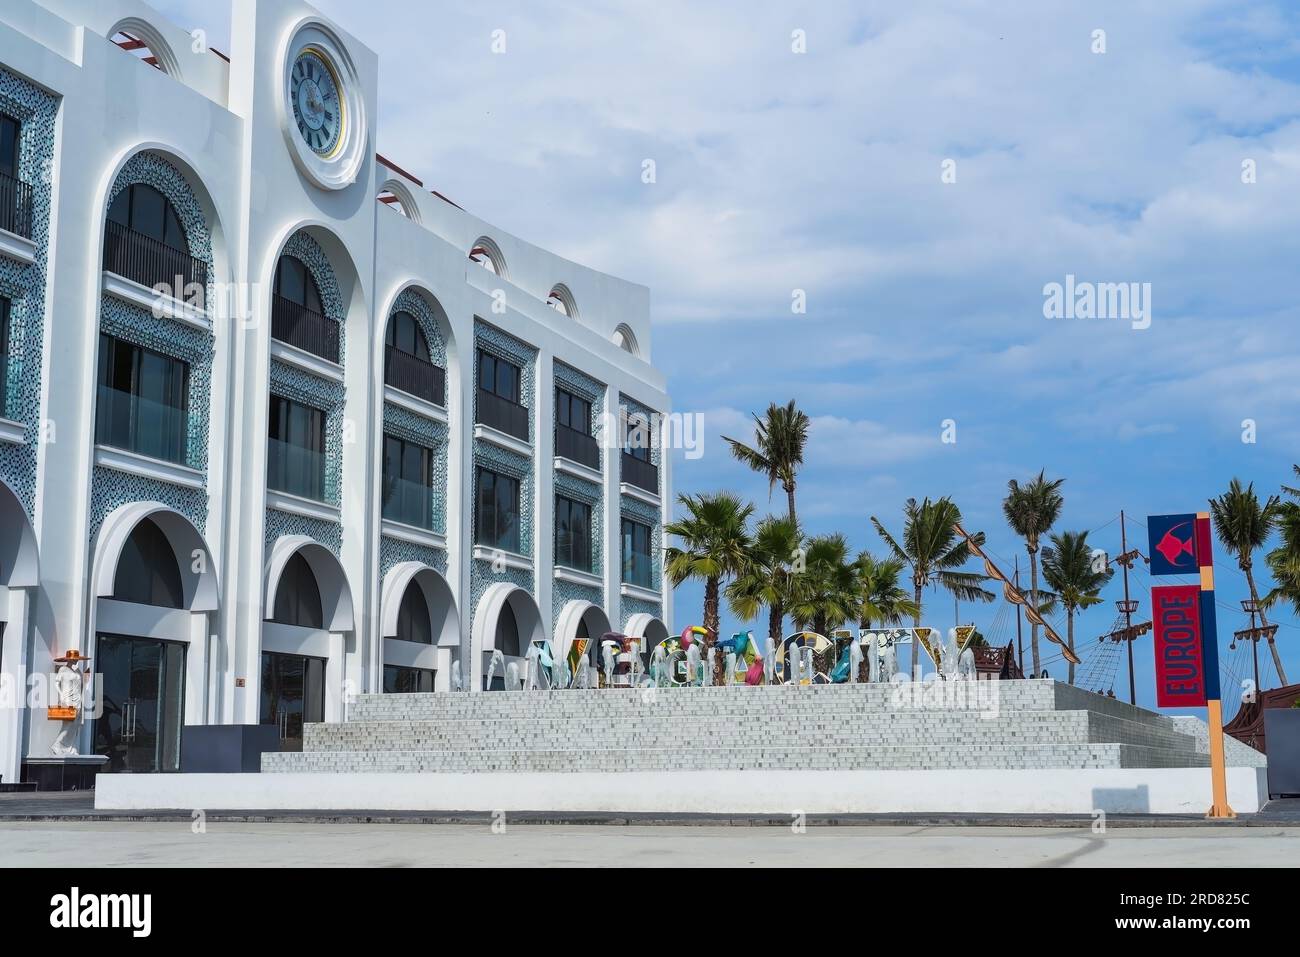 Nha Trang, Khanh Hoa, Vietnam - 19 July 2023: New touristic district Vega City Nha Trang, architecture and sculptures in European and Caribbean style Stock Photo